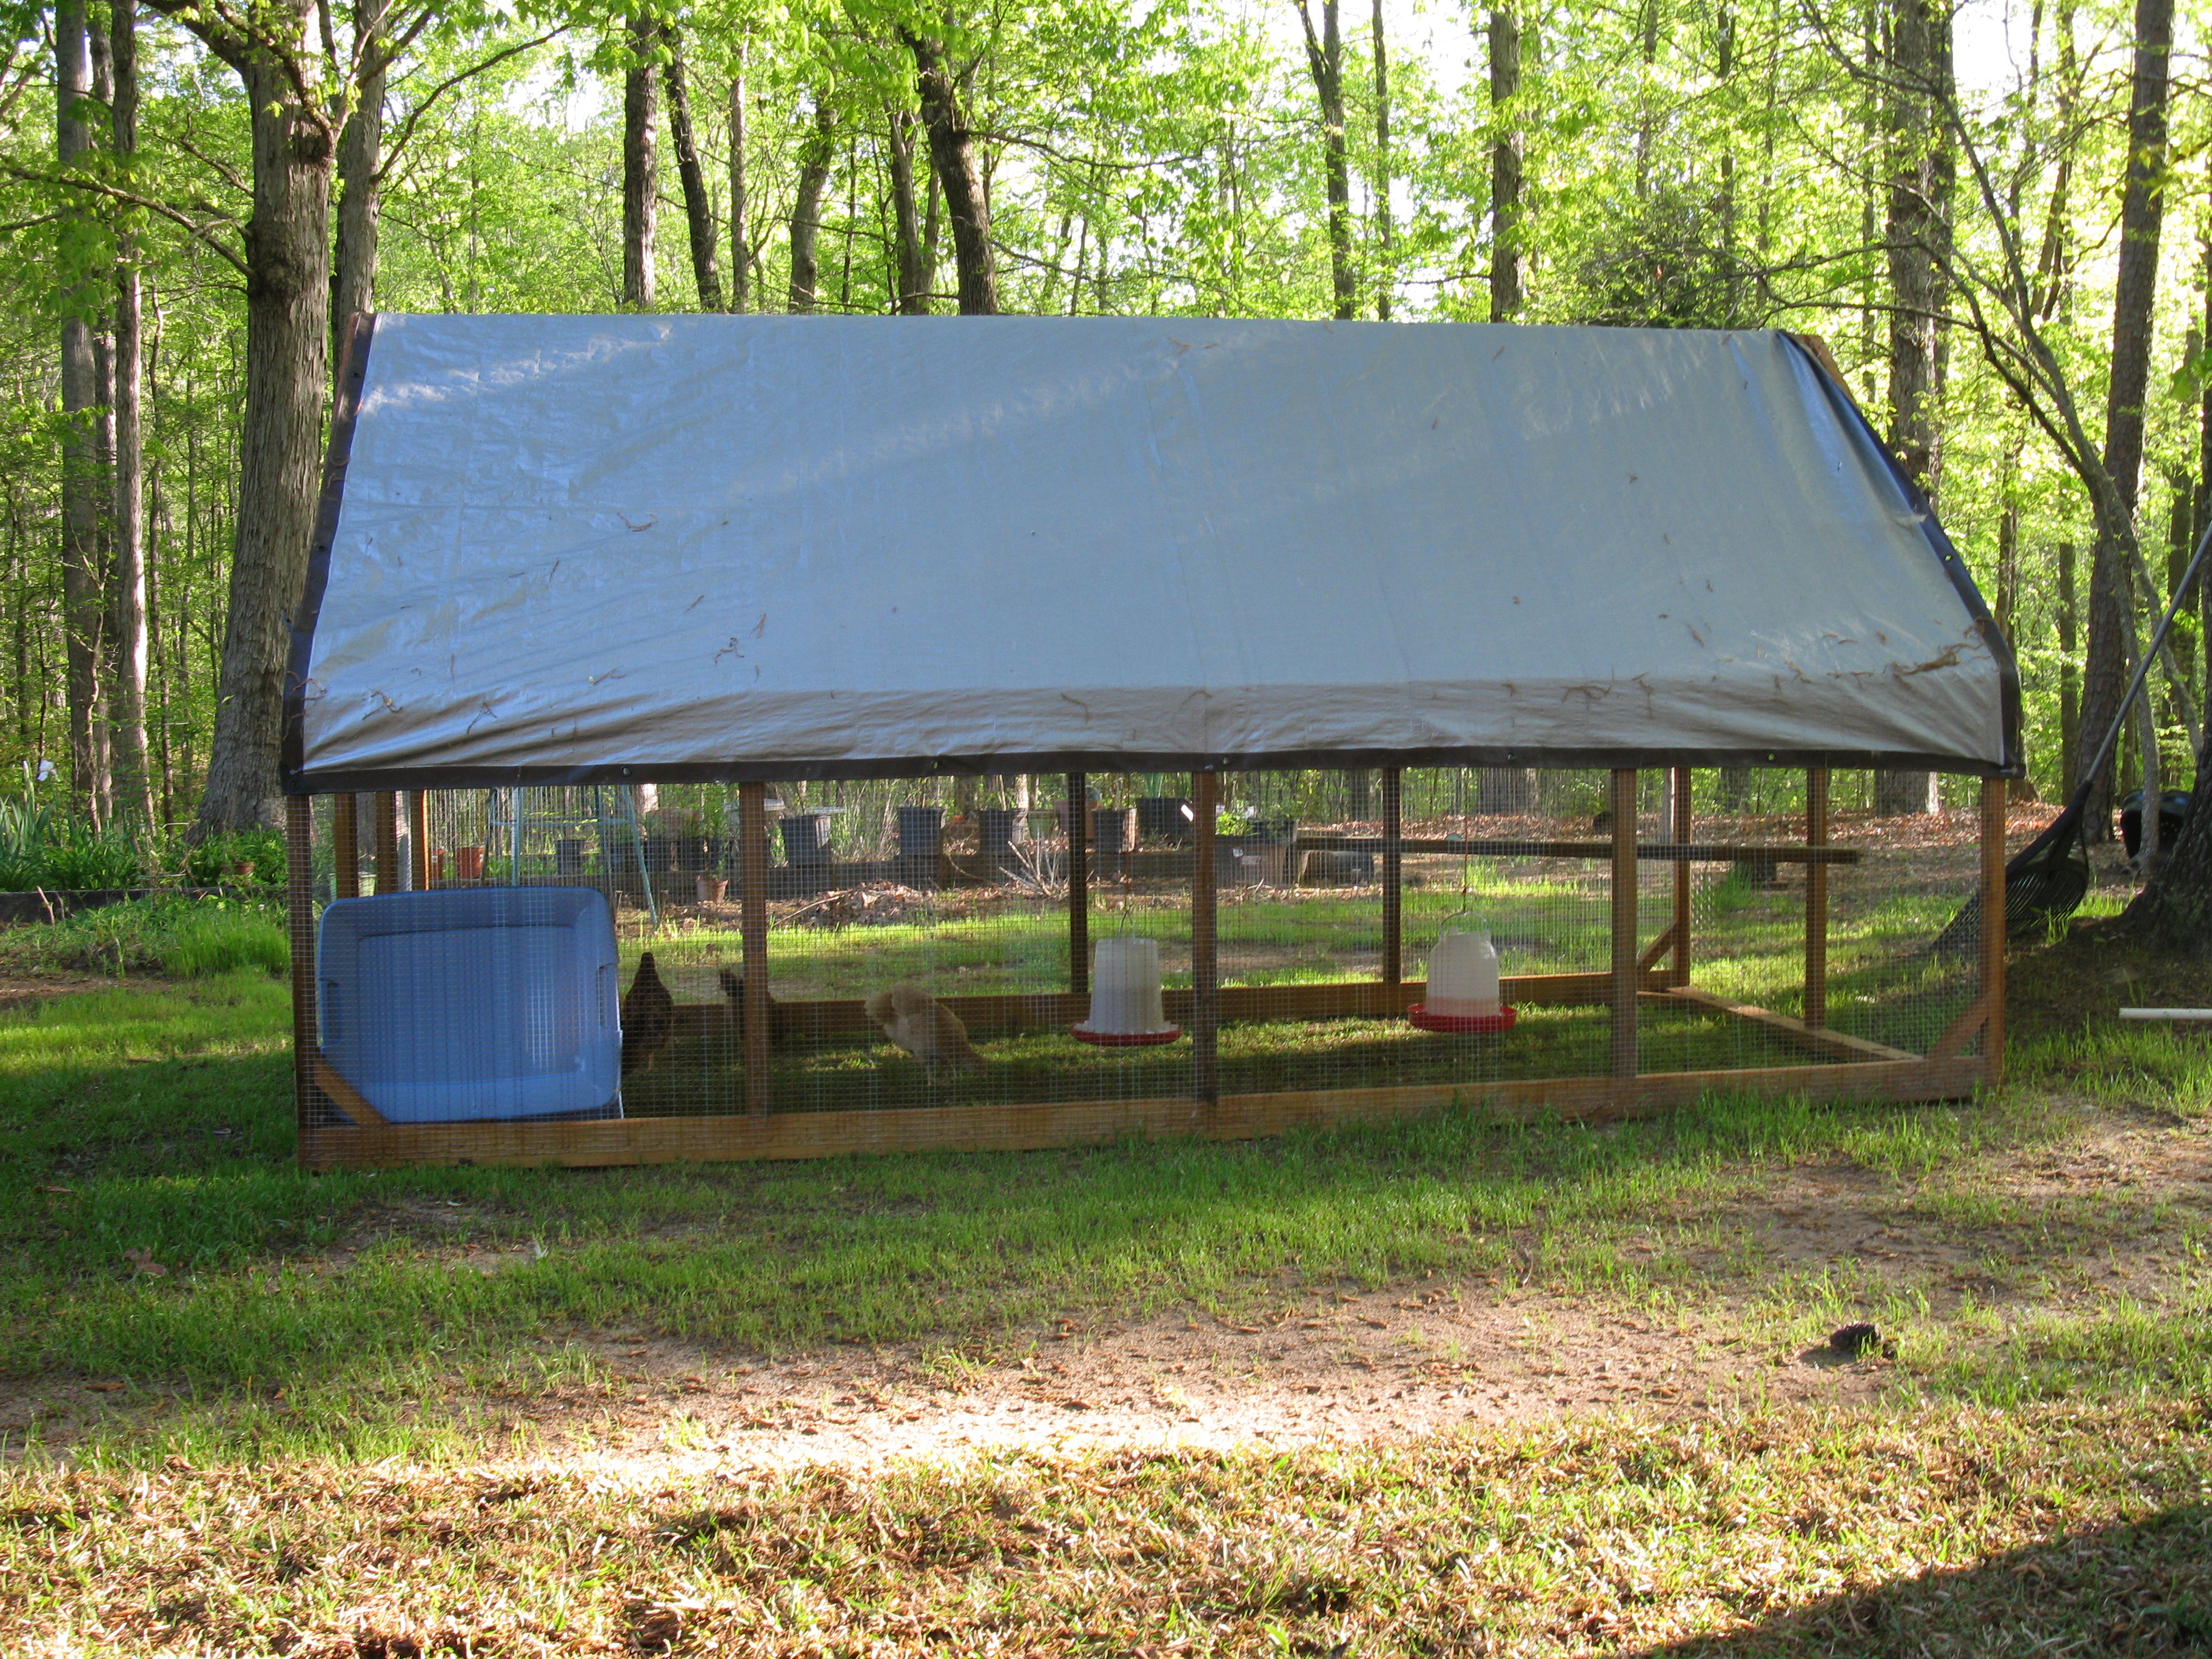 I used a 12' x 8' tarp on the run for shade and rain.  Works very well.